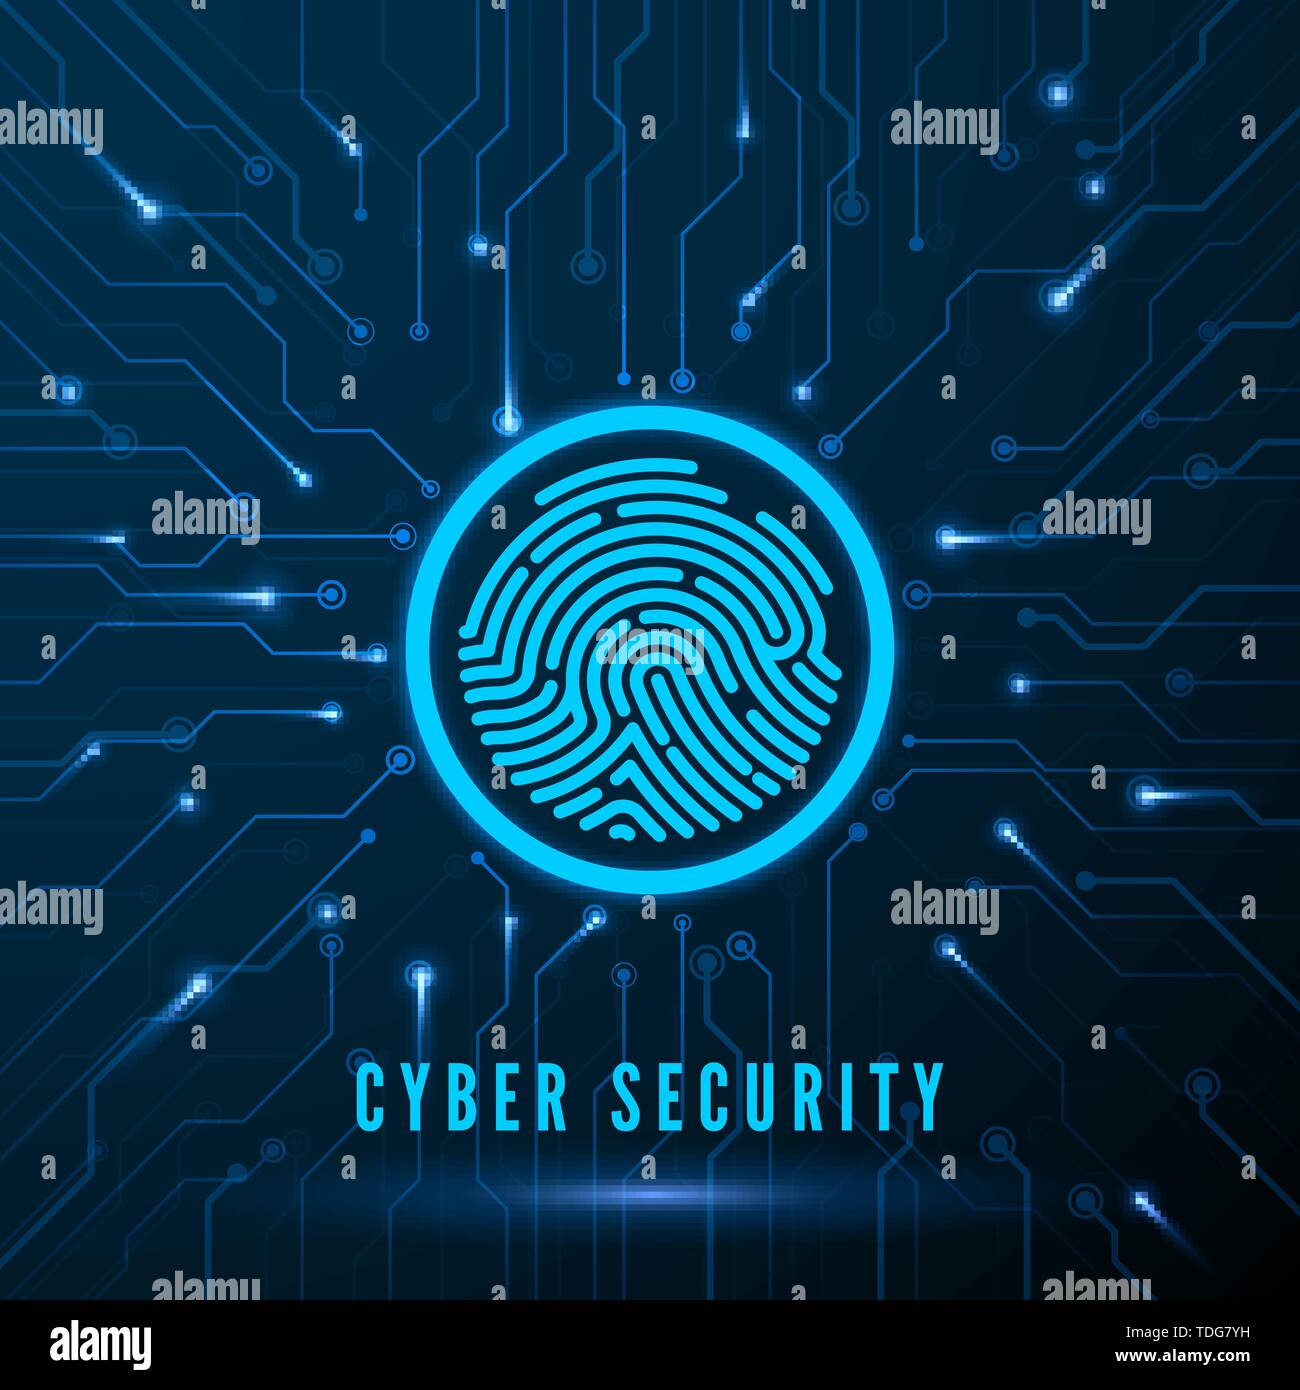 Cyber Security. Fingerprint Scanning Identification System. Finger Print on Circuit. Biometric Authorization and Security Concept. Vector illustration Stock Vector